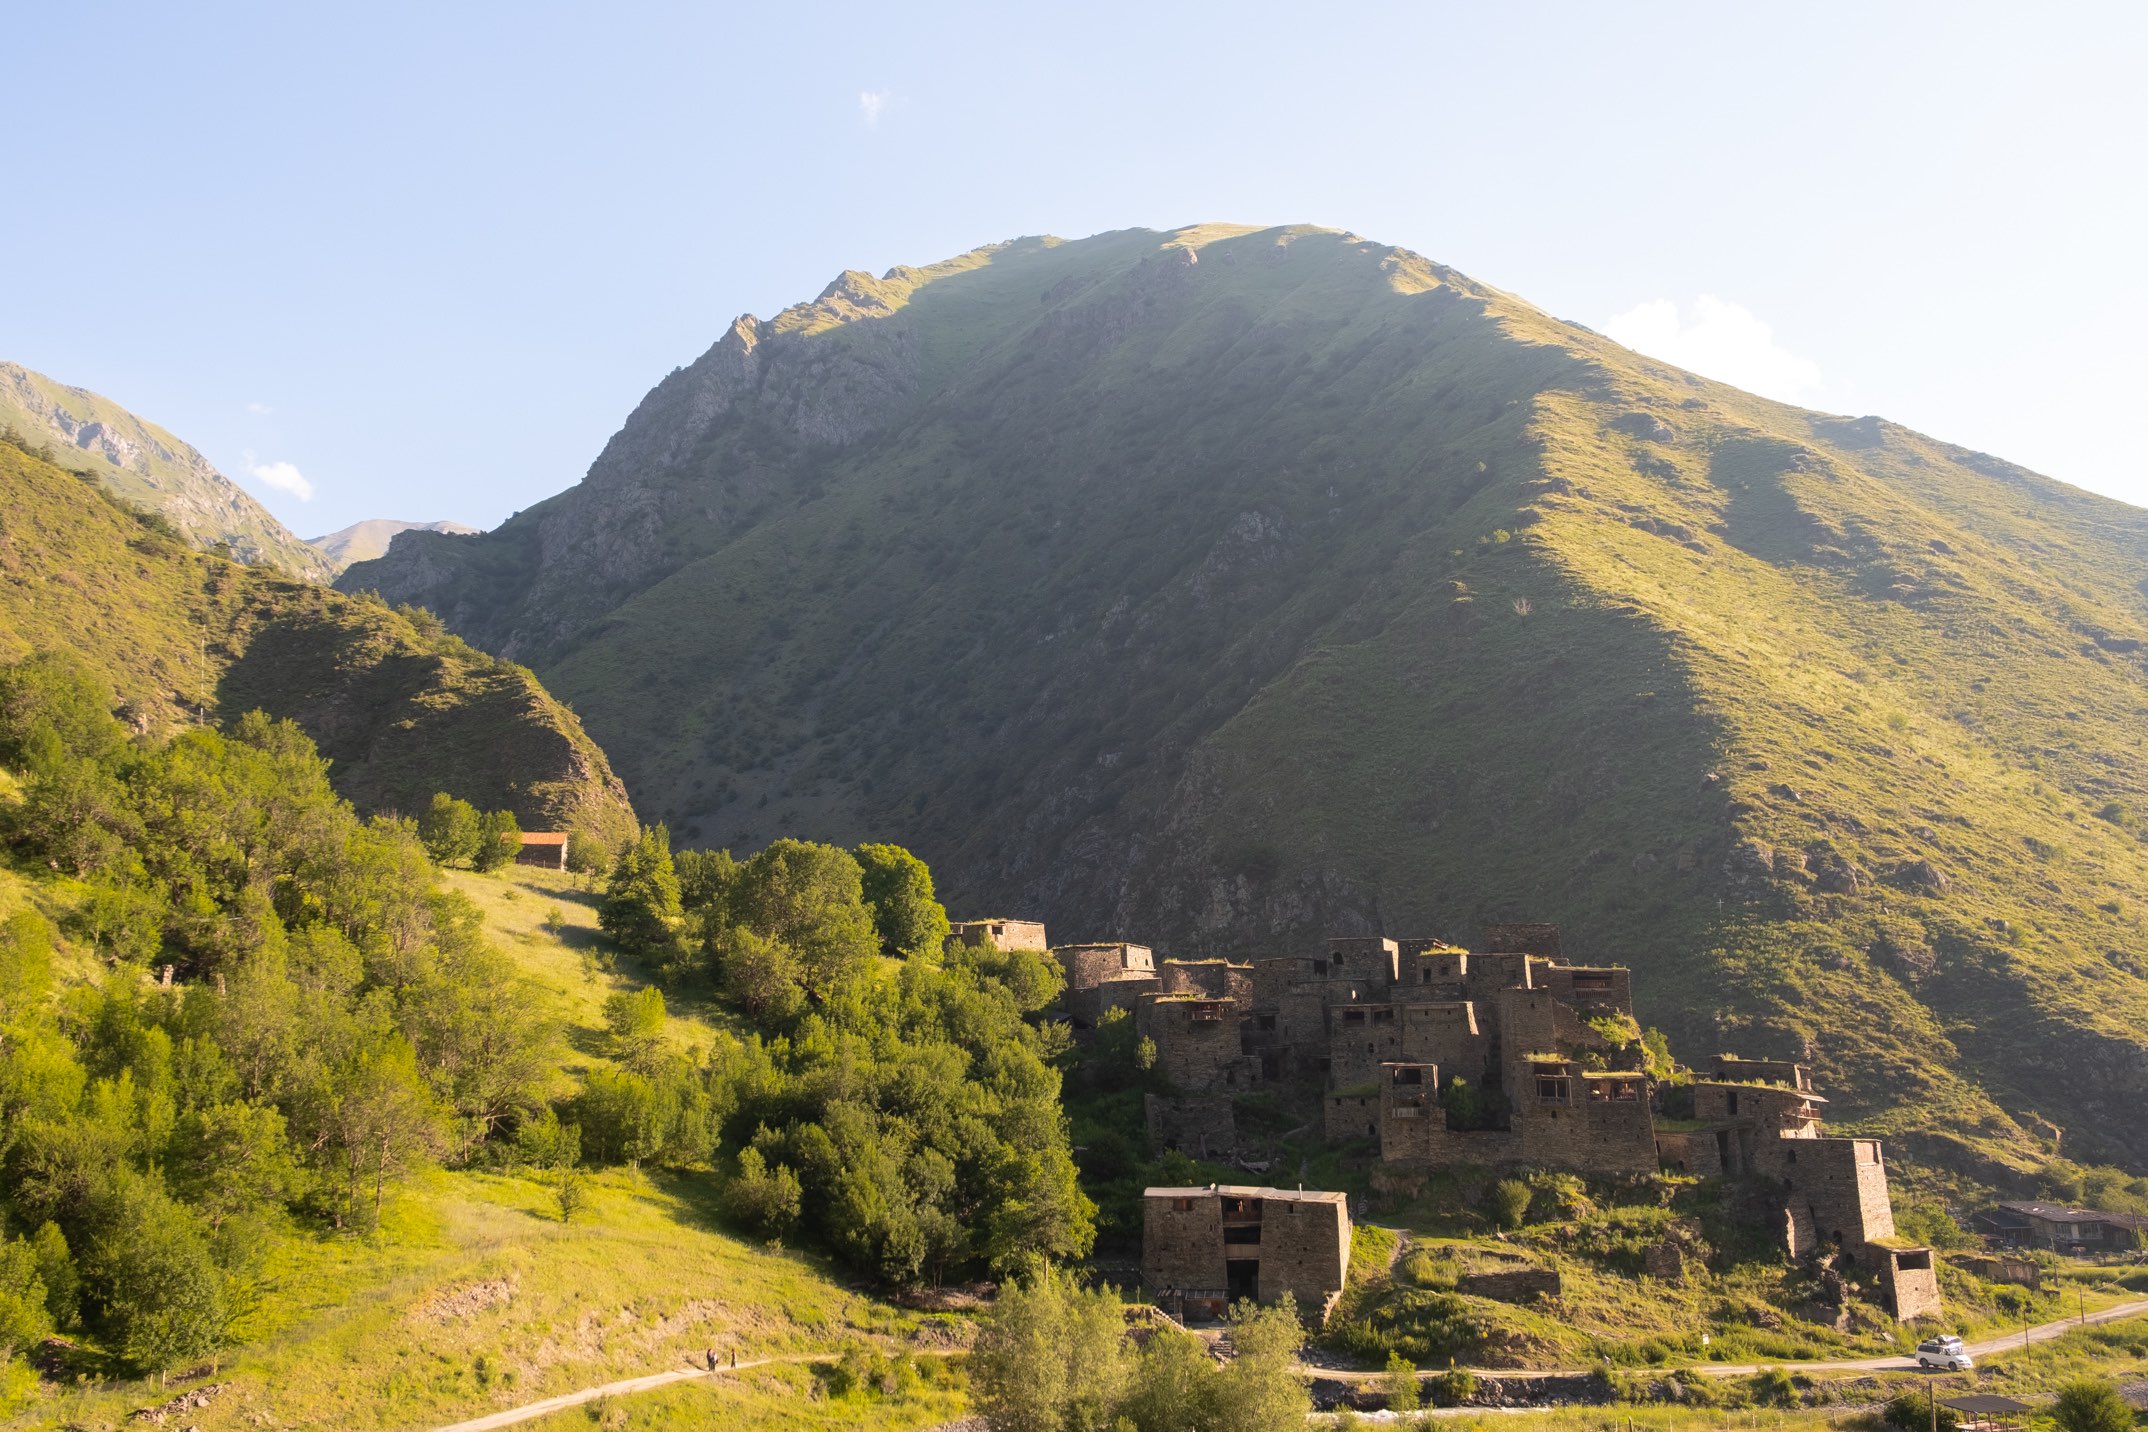 The ancient medieval village of Shatili, Khevsureti flanked by mountain peaks